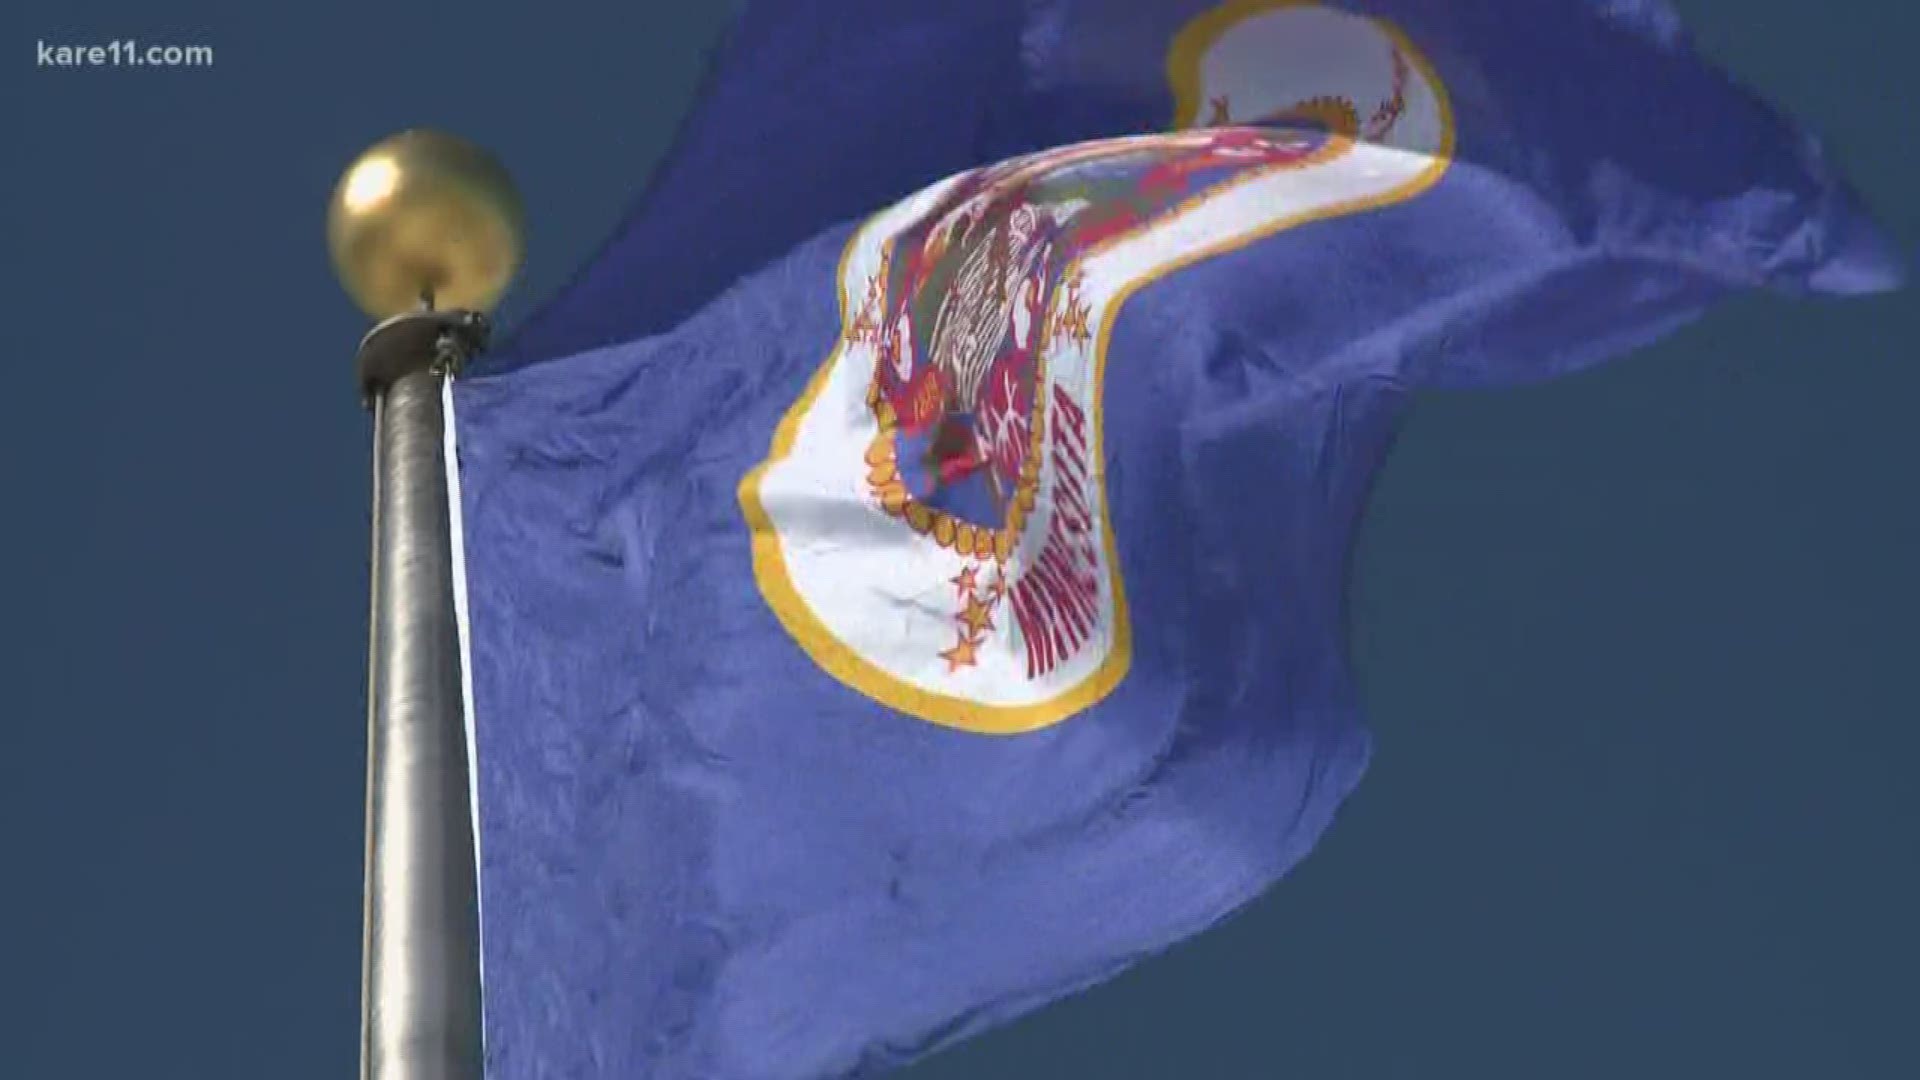 Four decades after its debut, lawmakers are still discussing the layout and design of the Minnesota state flag, questioning its relevance to the state right now.